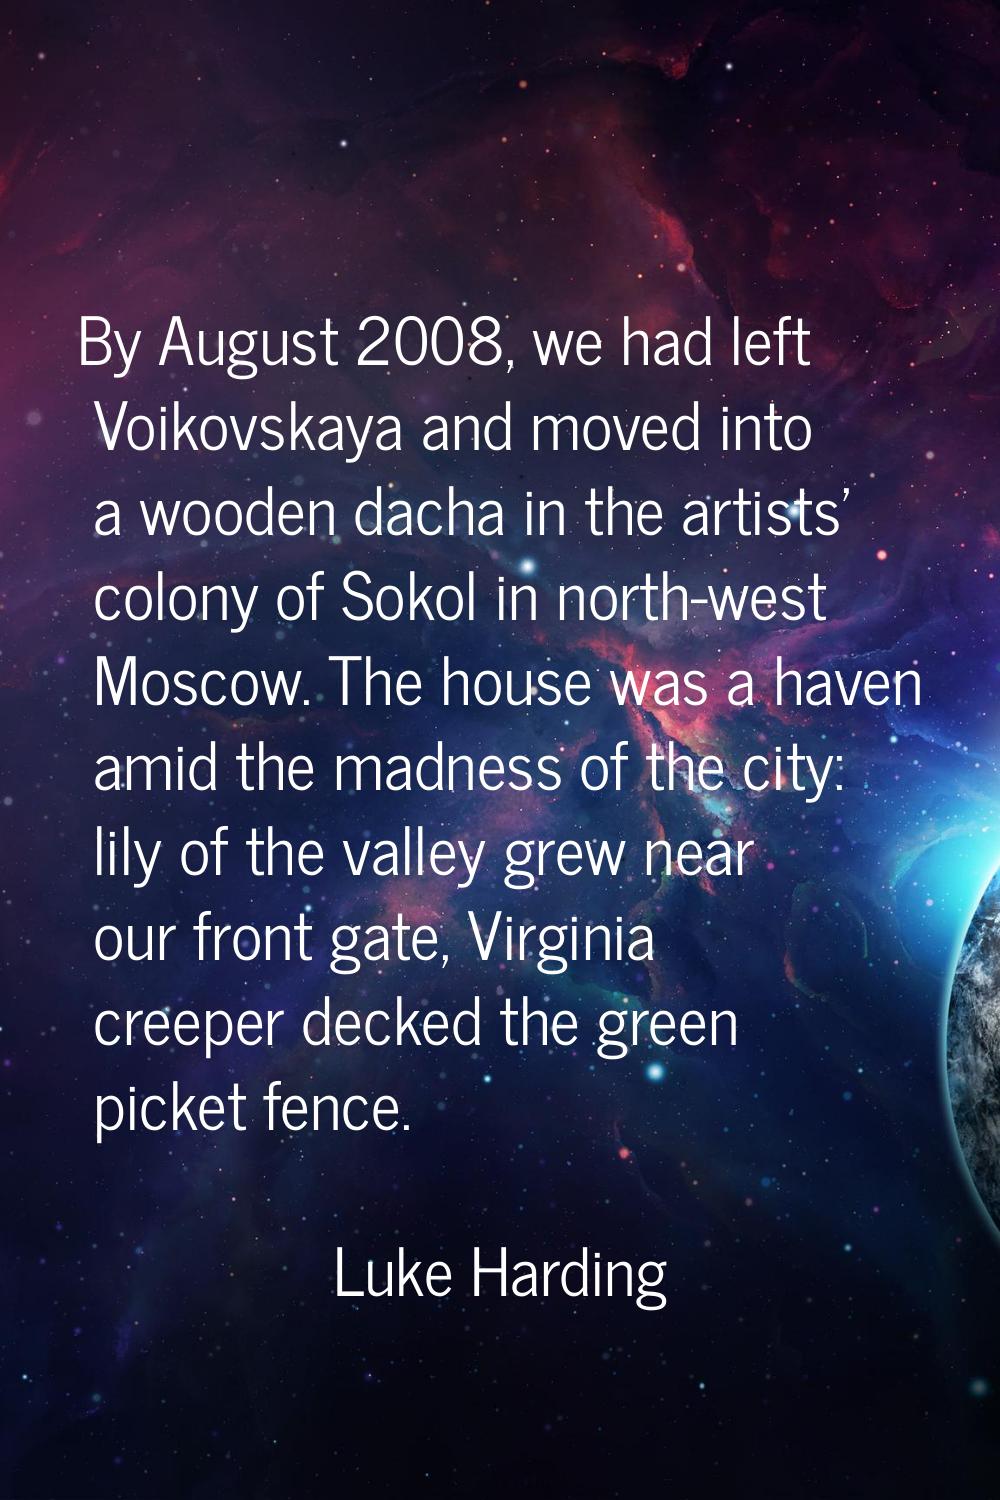 By August 2008, we had left Voikovskaya and moved into a wooden dacha in the artists' colony of Sok